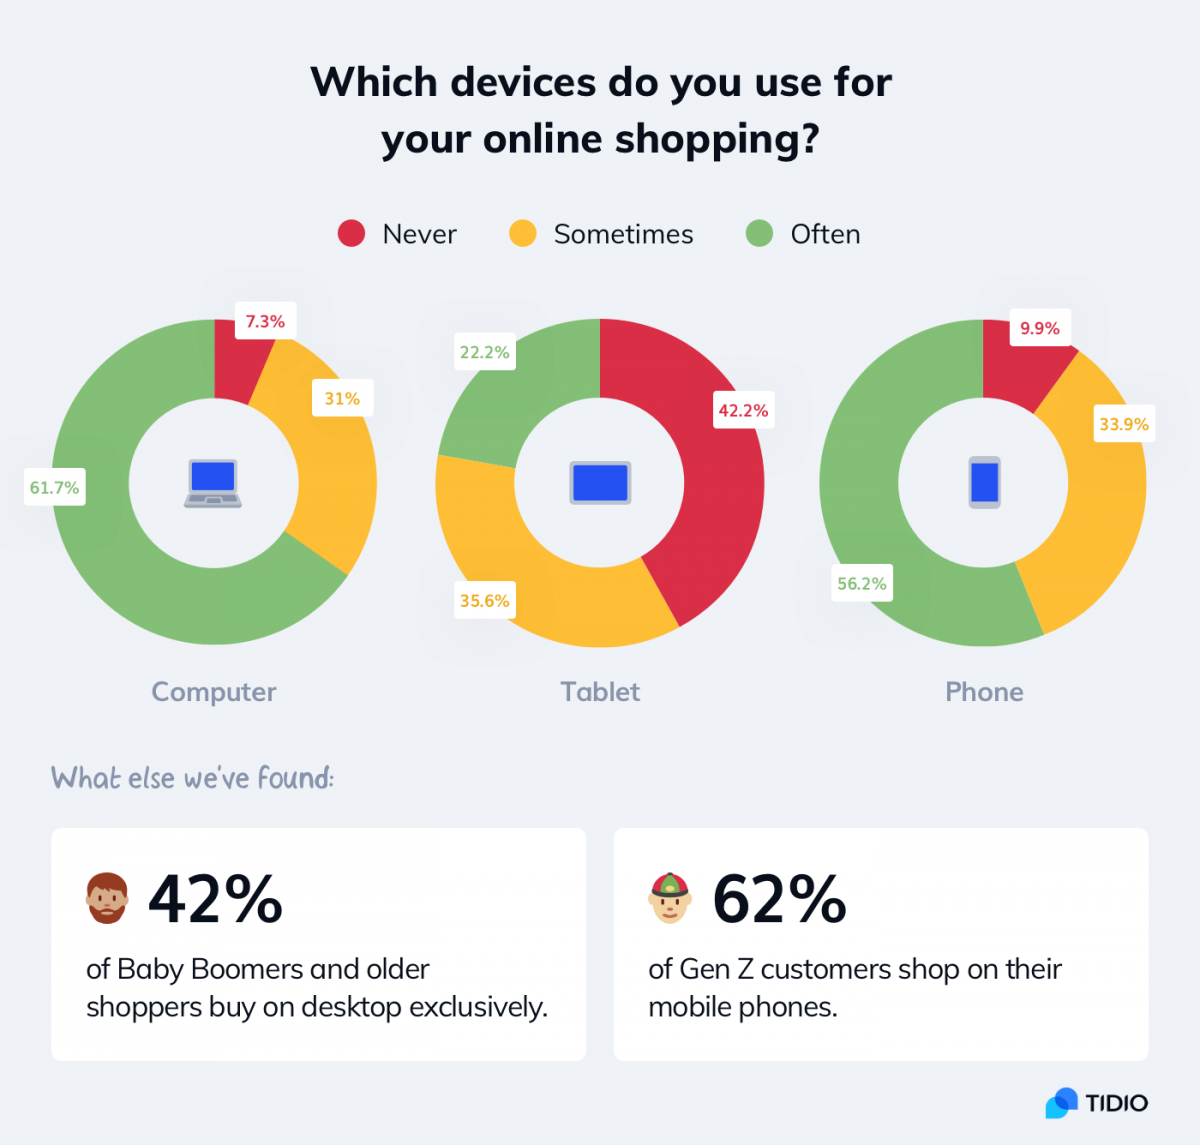 Popular devices used for online shopping